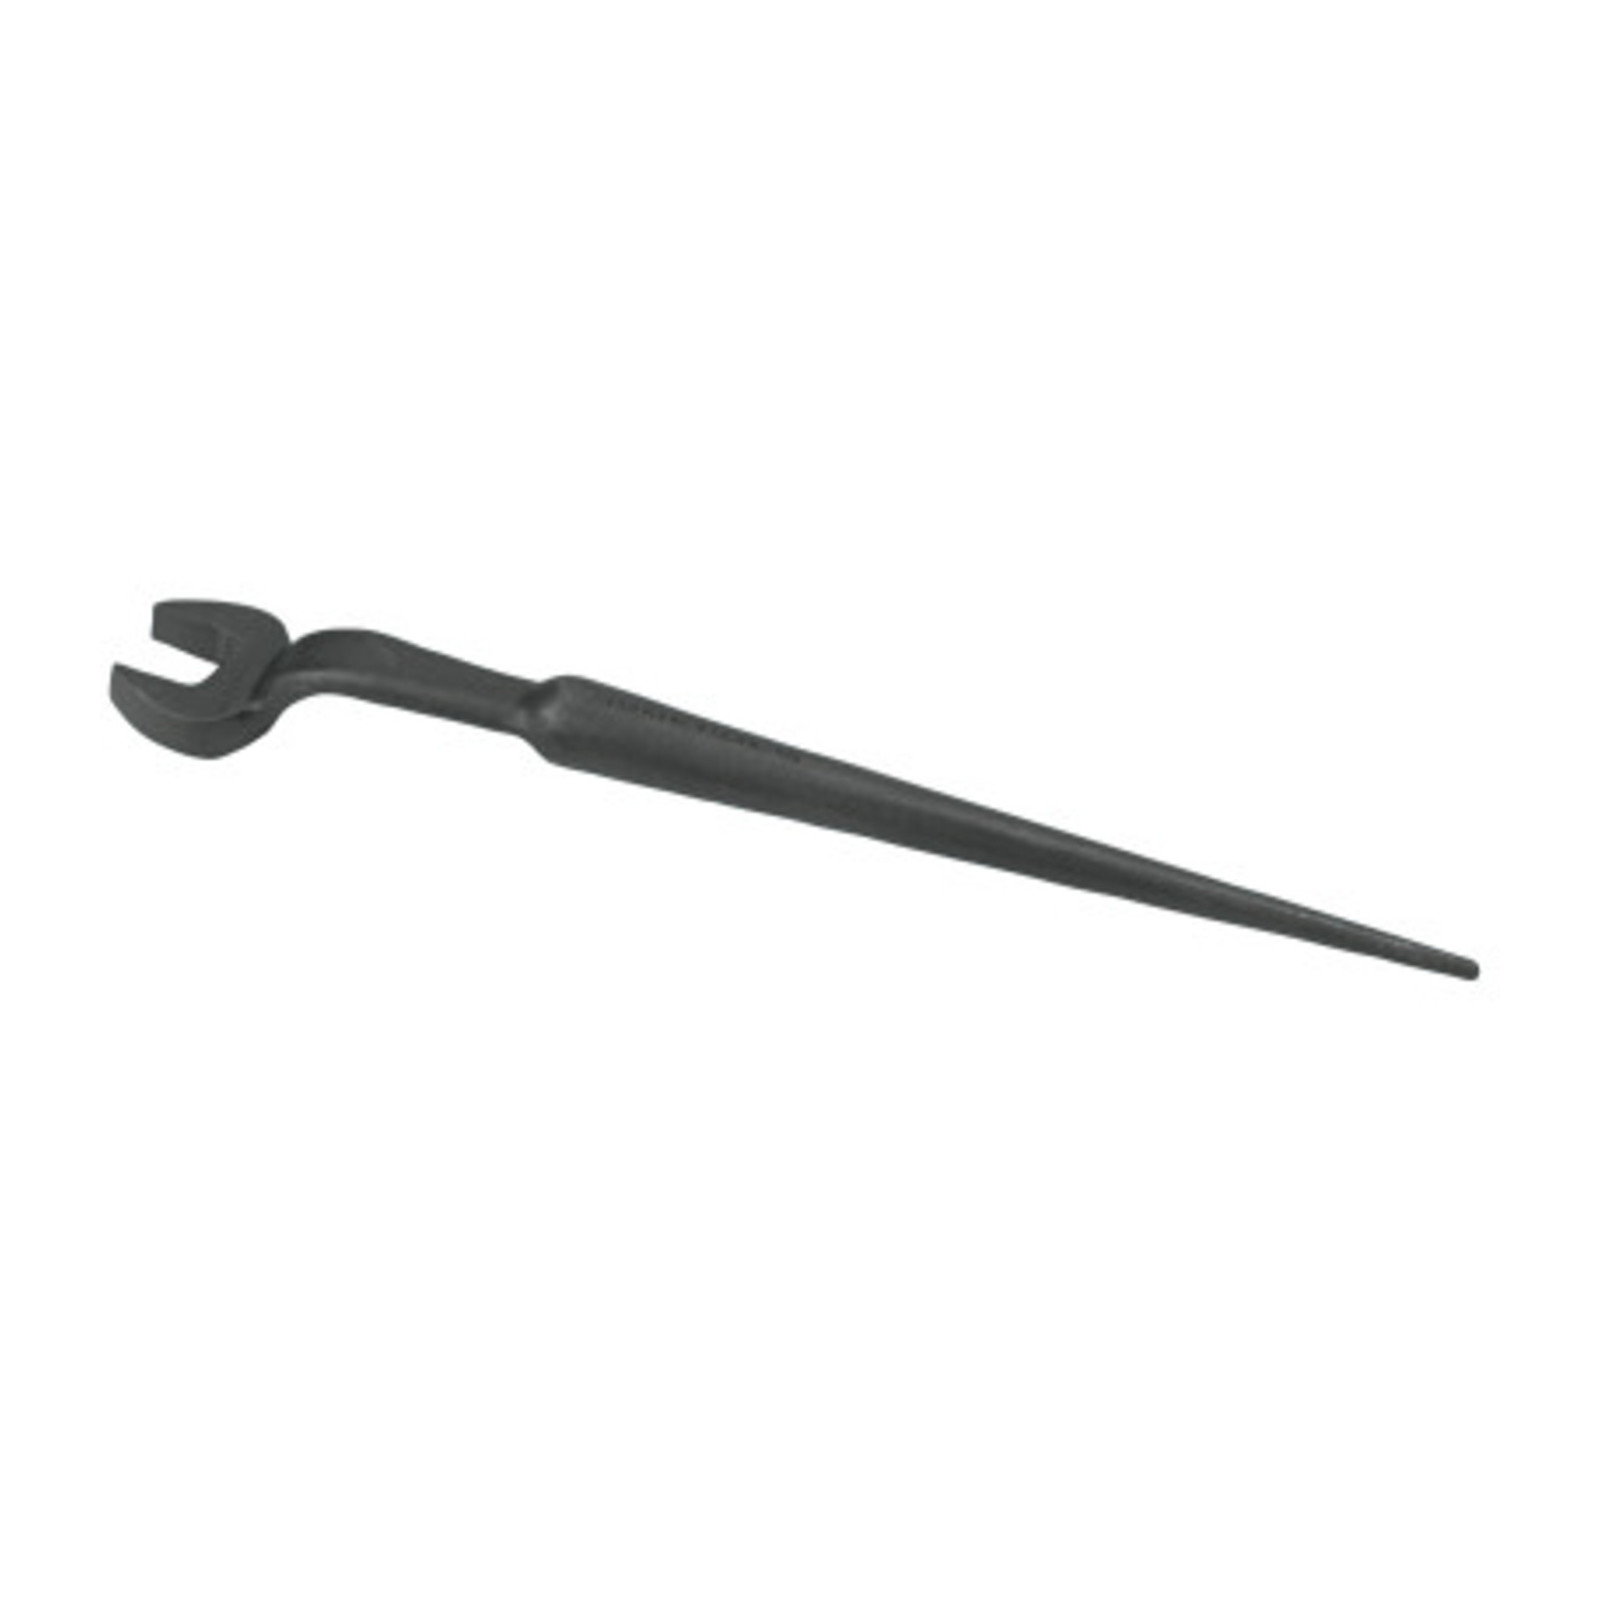 Stanley 1-1/16" OFFSET HEADPROTO STRUCTURAL WRENCH